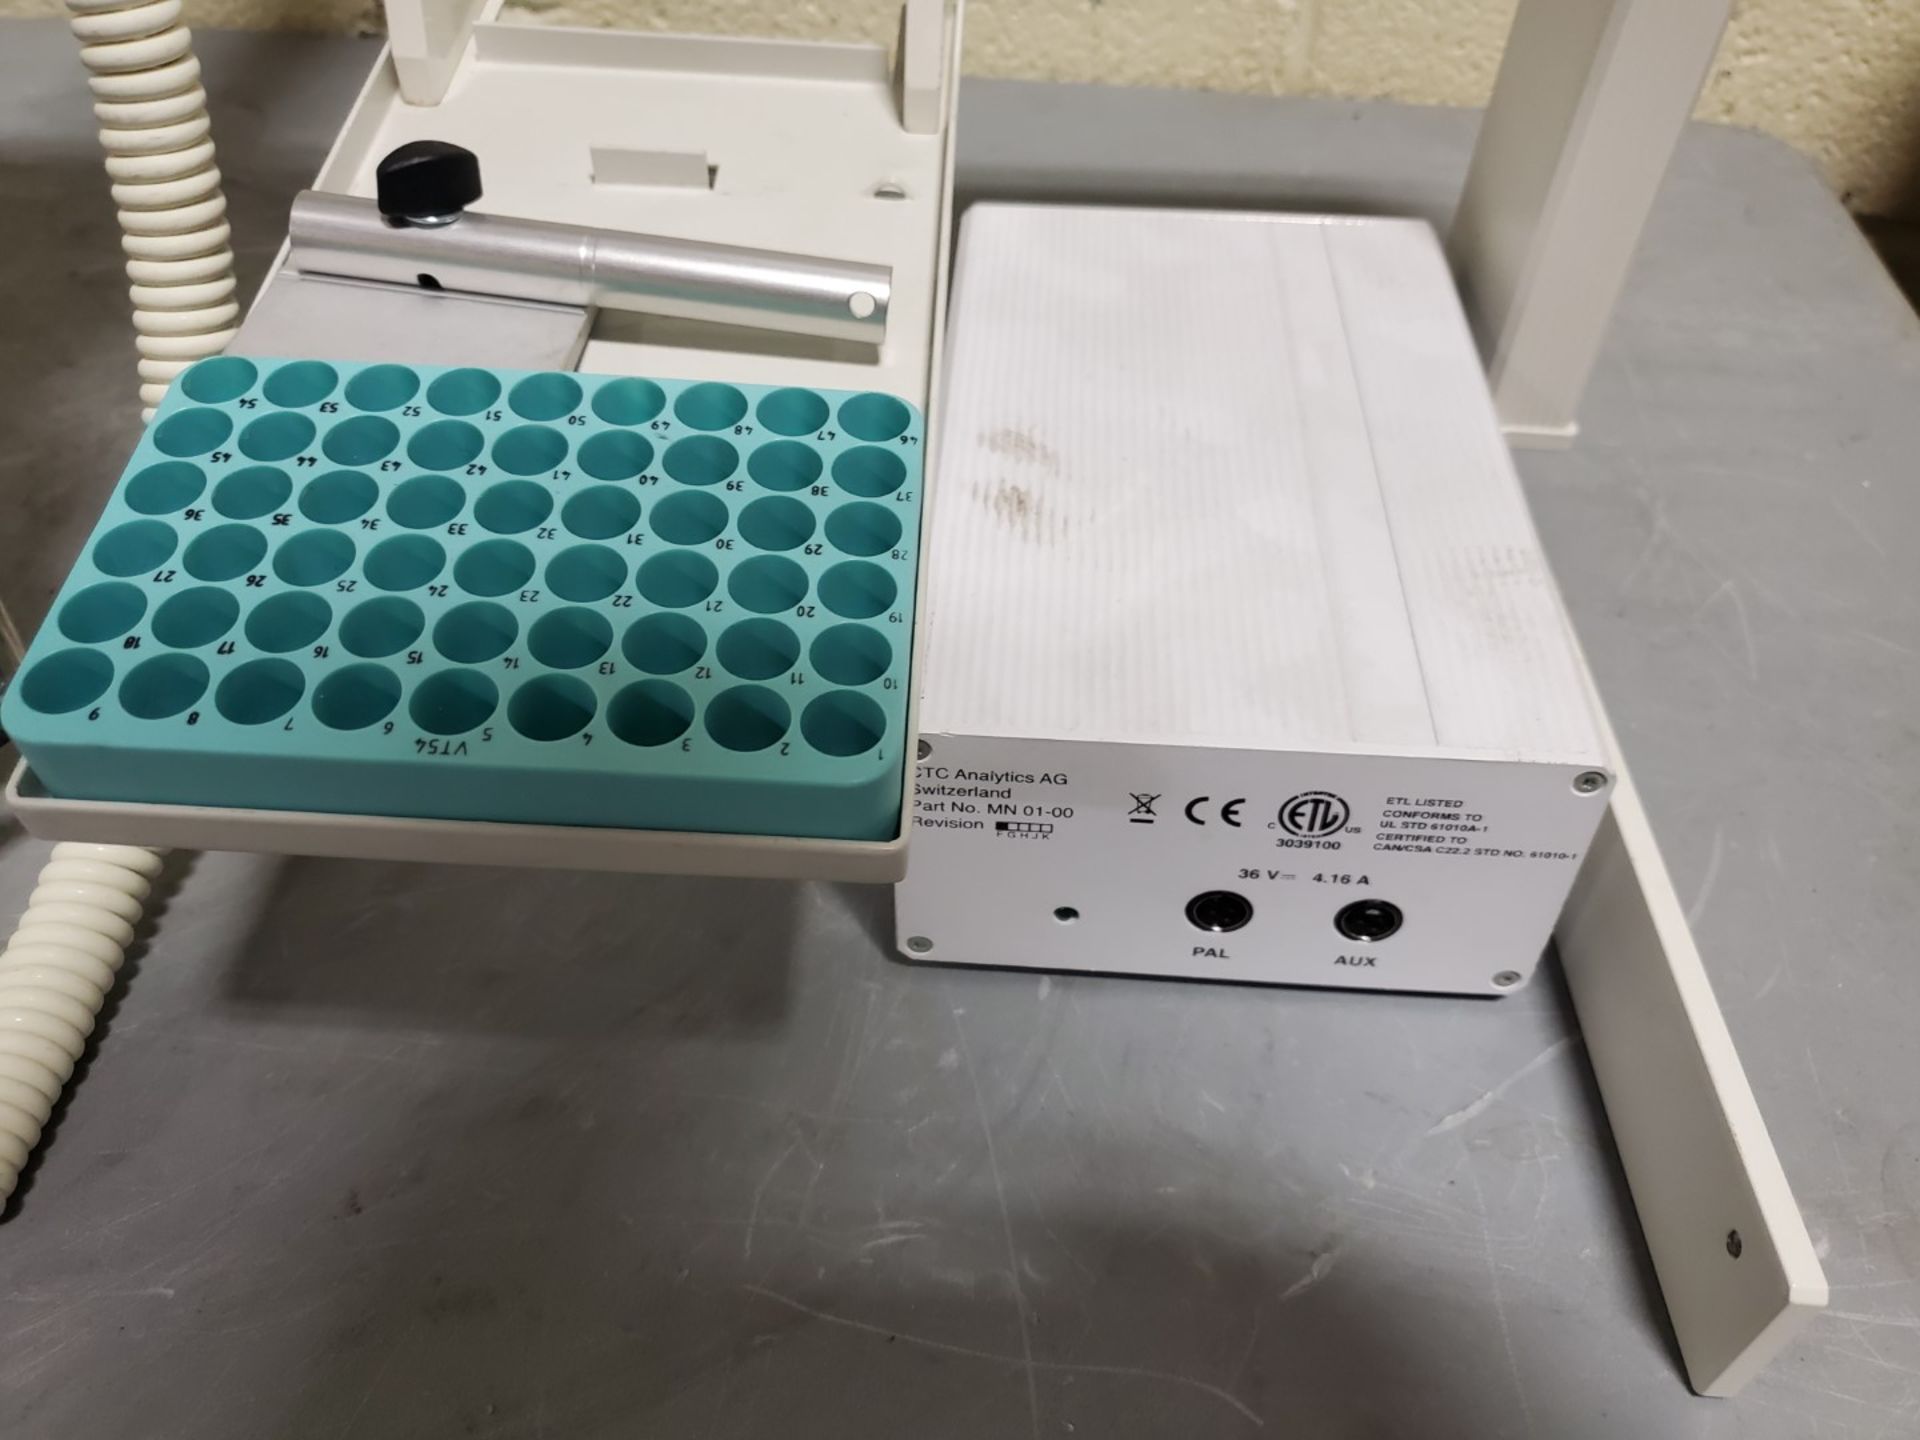 Agilent Technologies CTC Analytic combipal Autosampler, with serial# 1212155. (TAG # 1200082) - Image 4 of 6